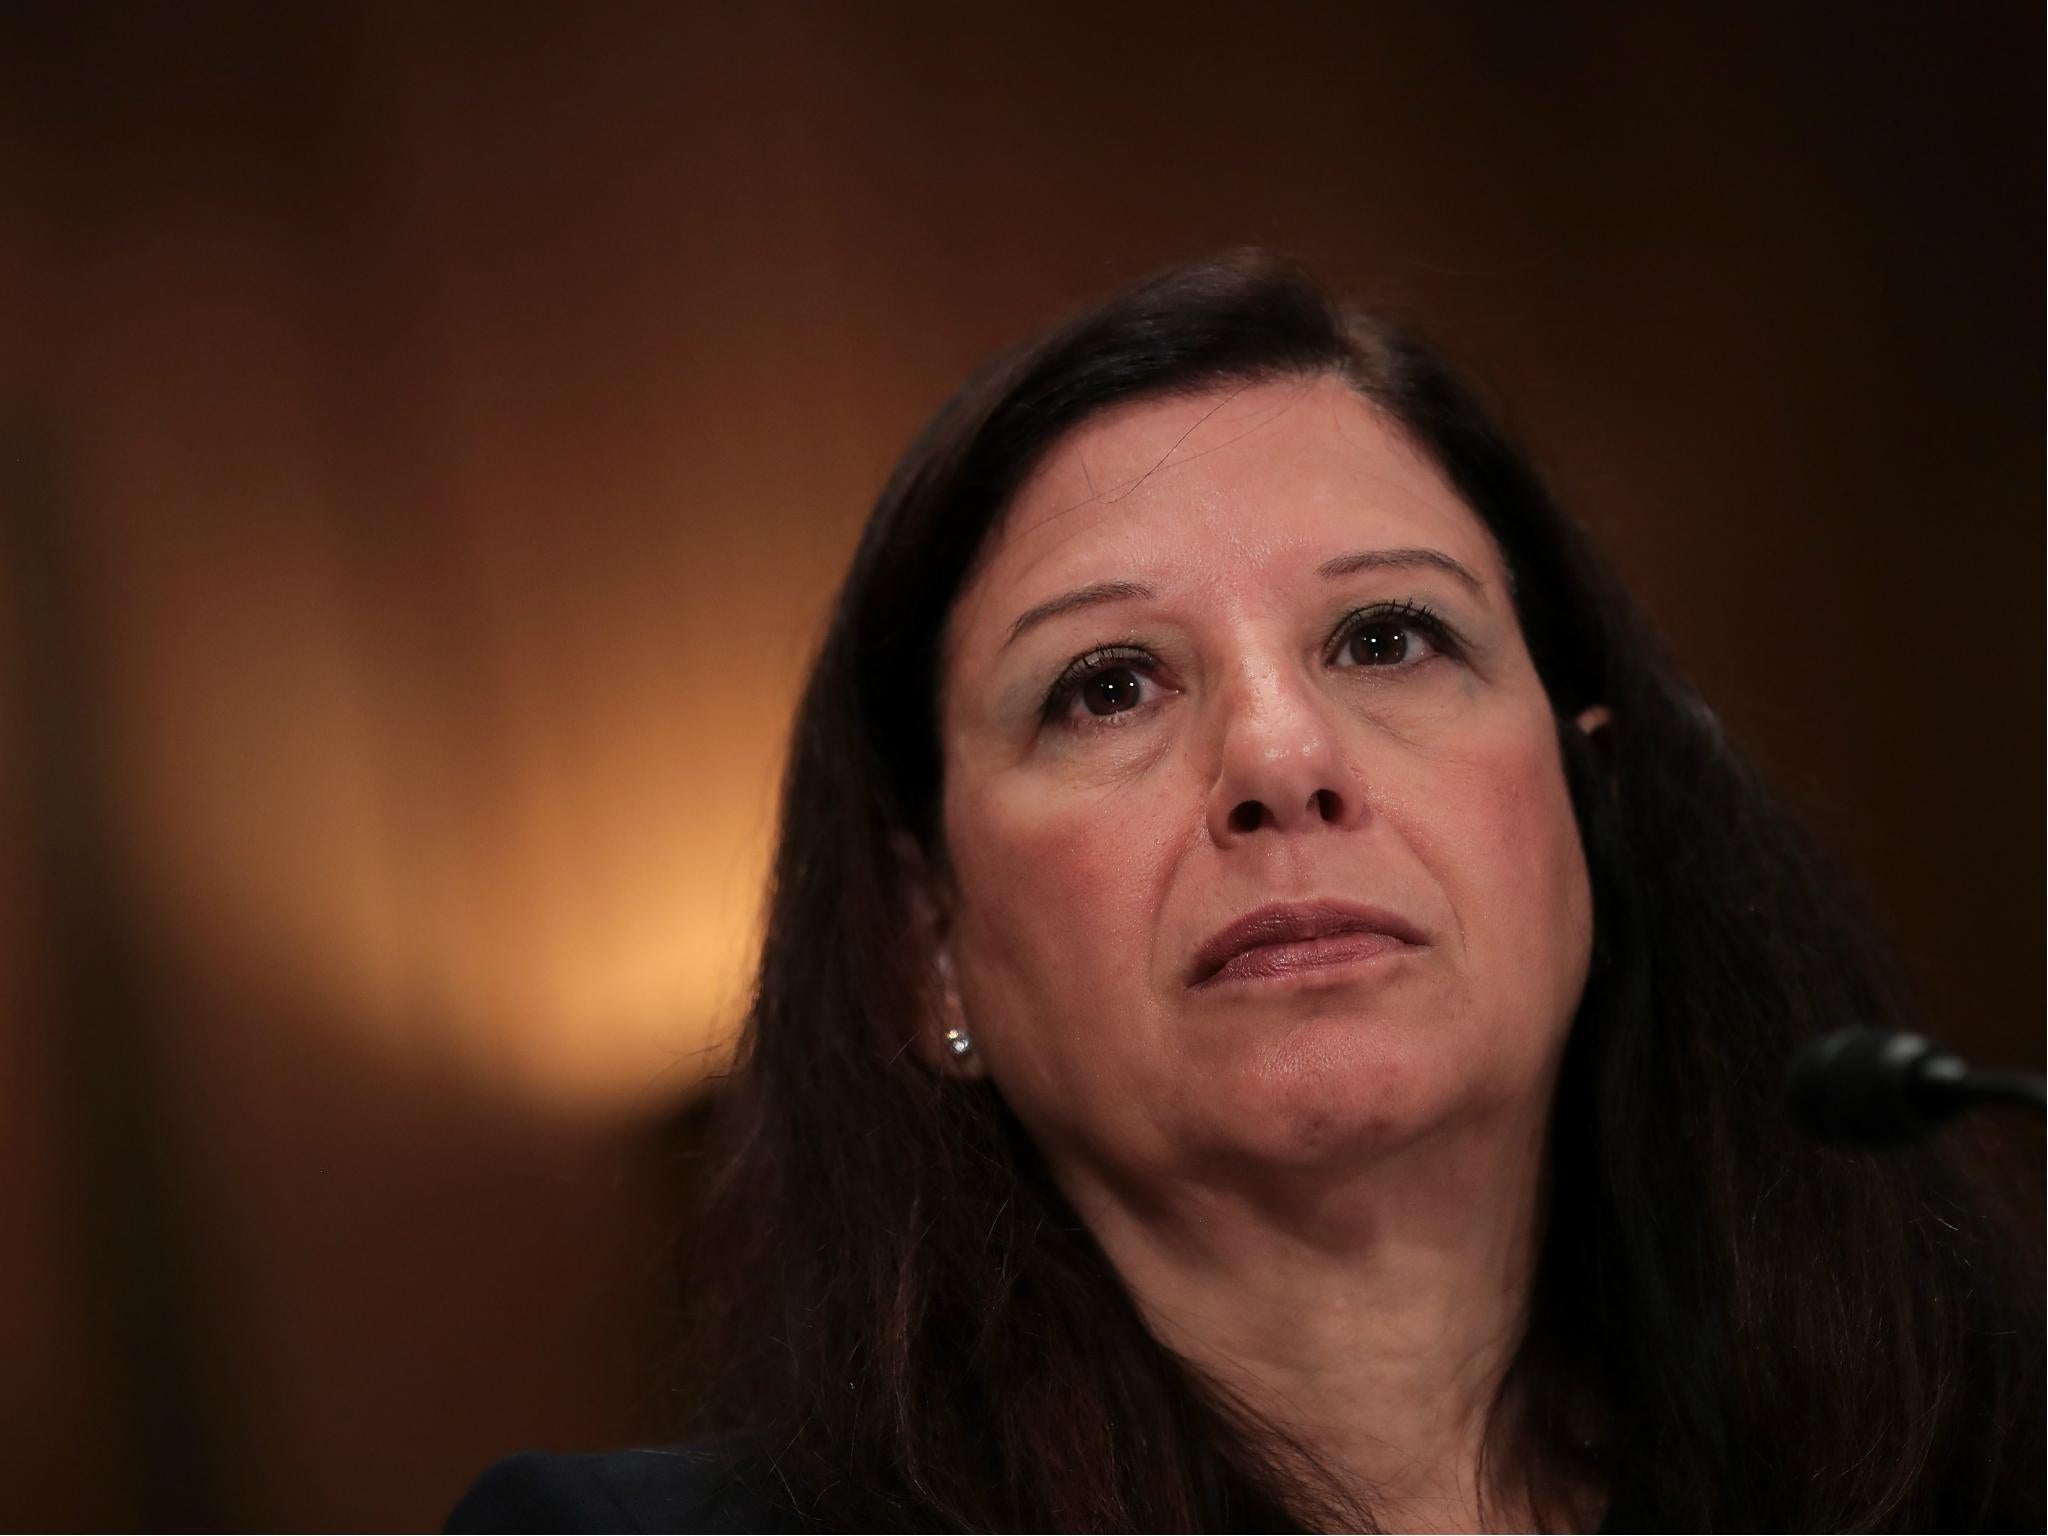 Acting Secretary of the Department of Homeland Security Elaine Duke is resigning after the White House asked her to reverse an immigration decision.